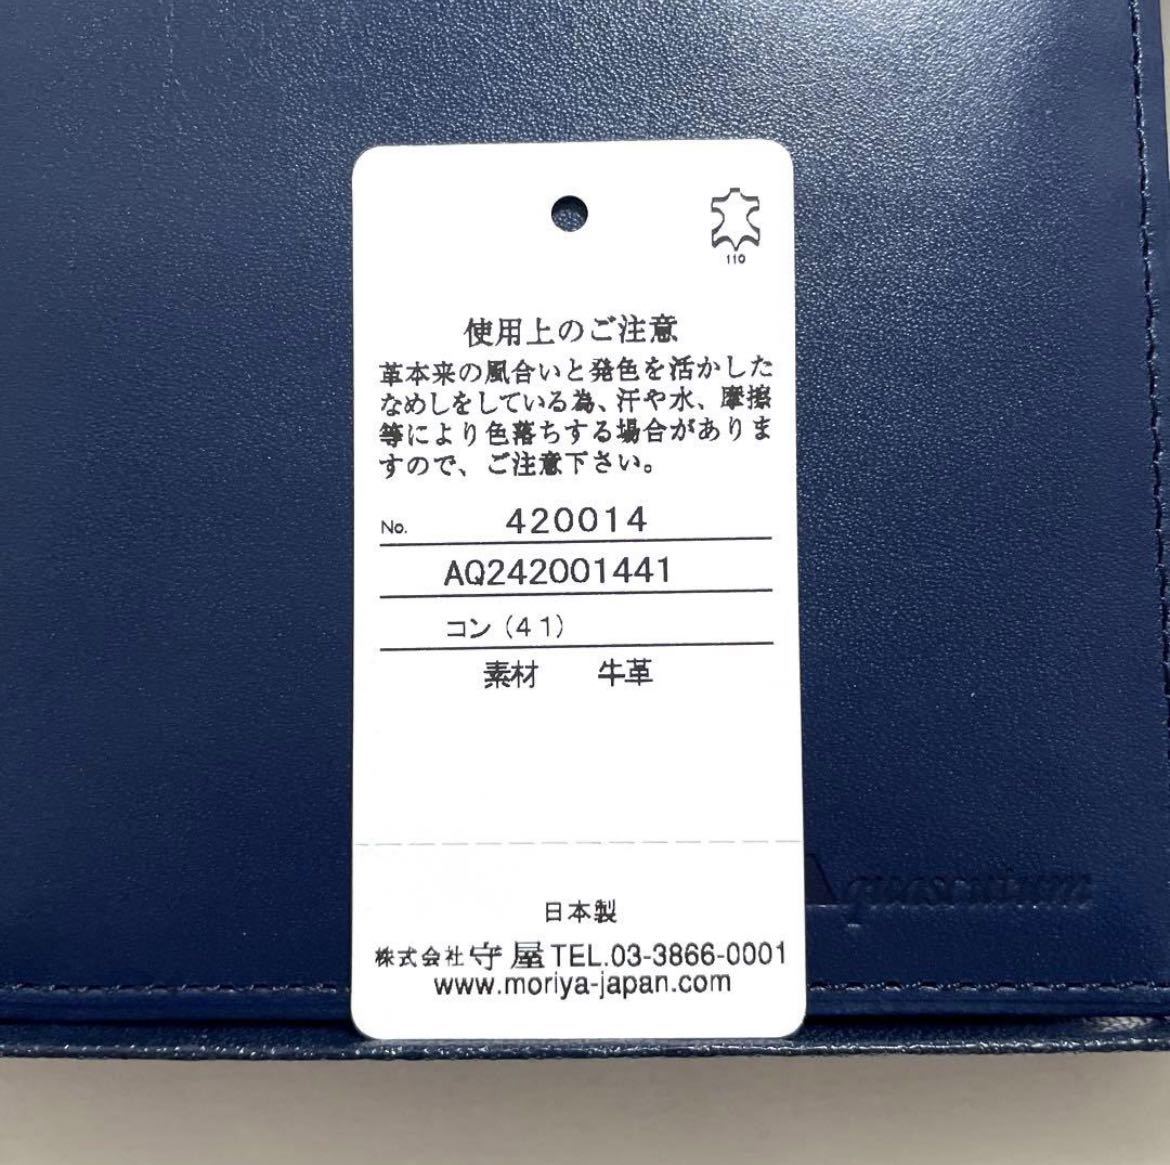  with translation new goods [ Aquascutum Aquascutum ] gentleman for made in Japan original leather purse leather wallet folding twice purse . inserting leather purse change purse . navy blue 